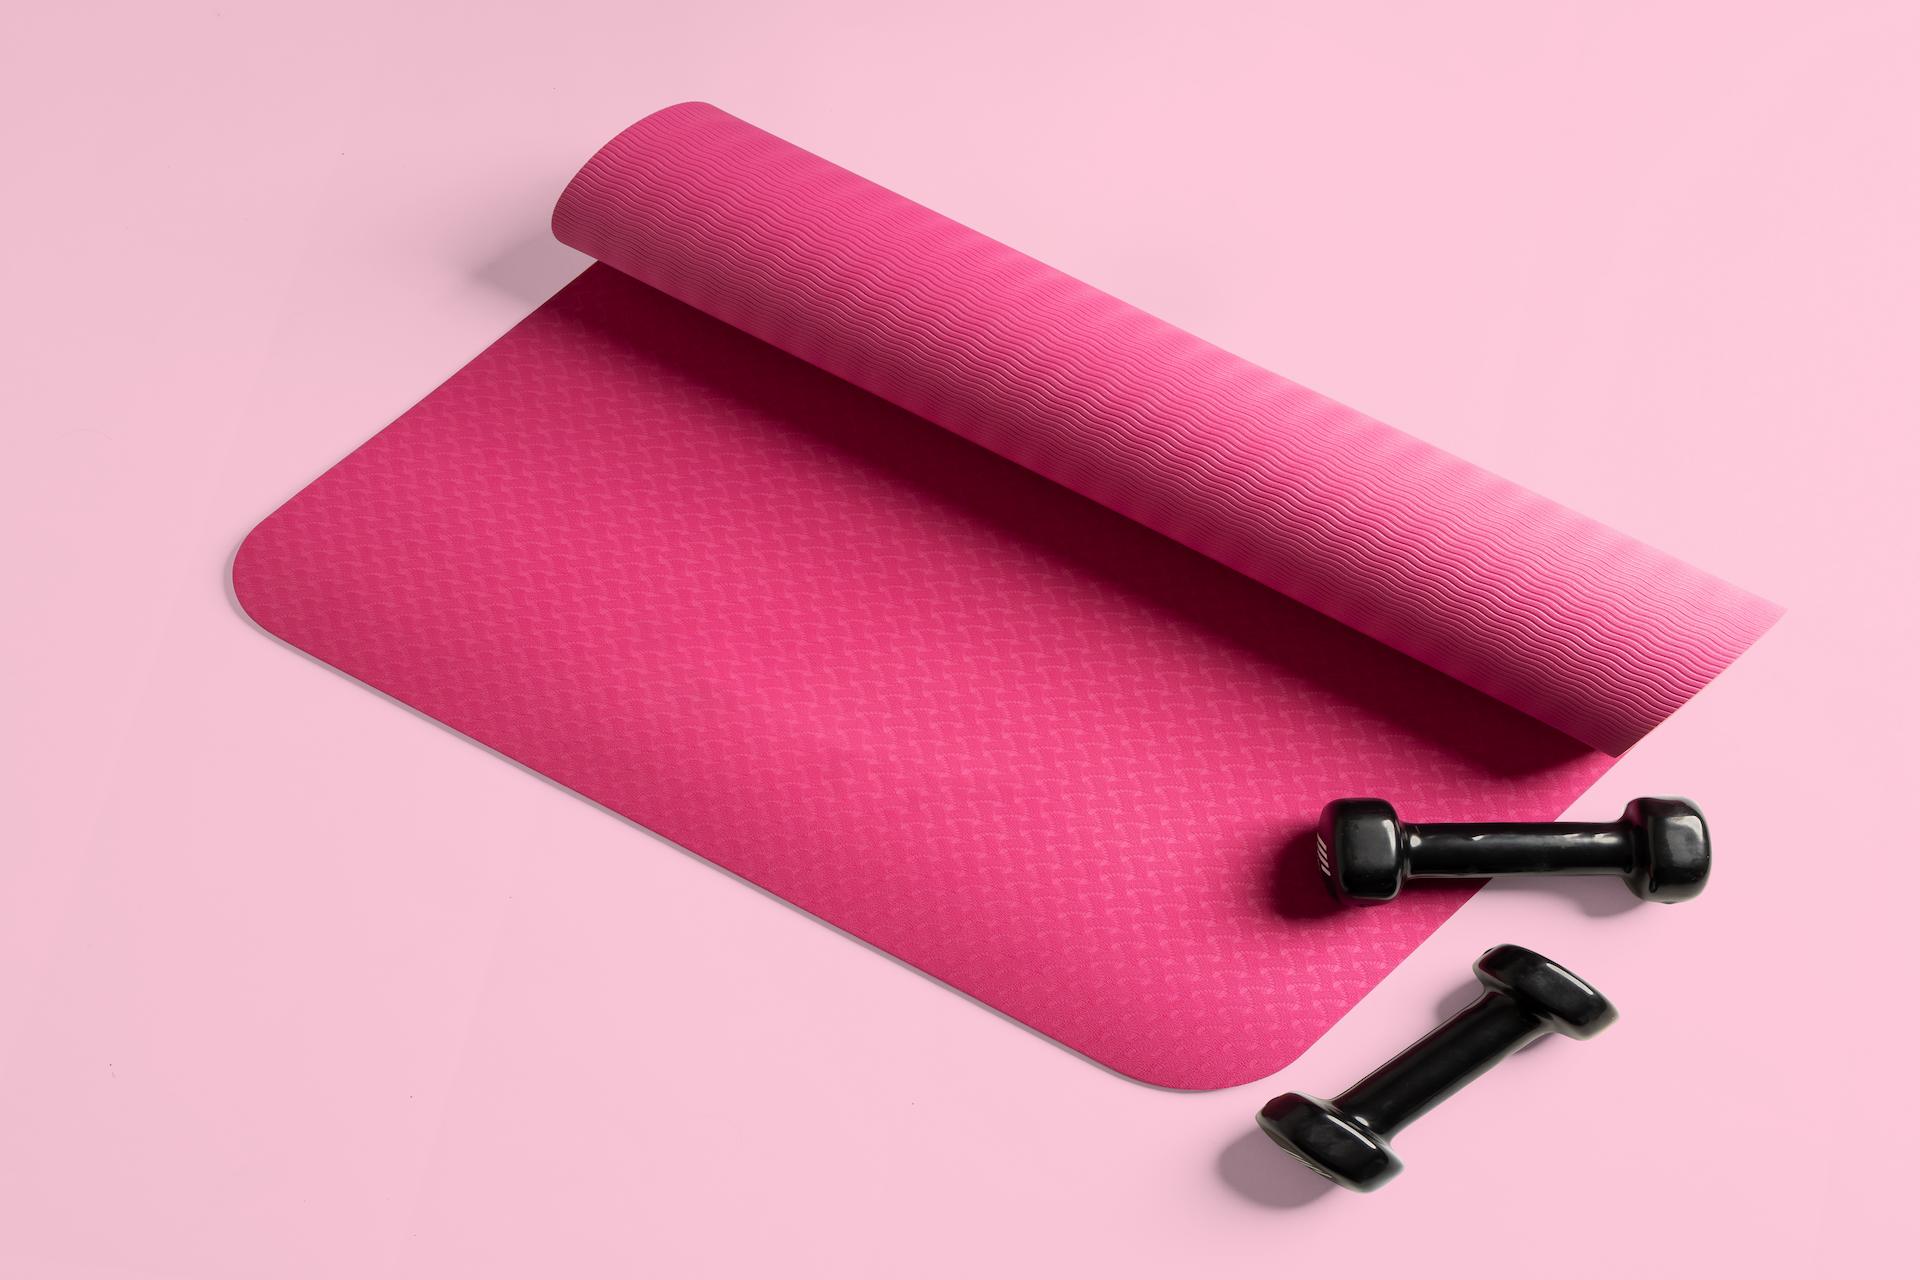 Why Expert Advice Using A Suitable Mat While Exercising?